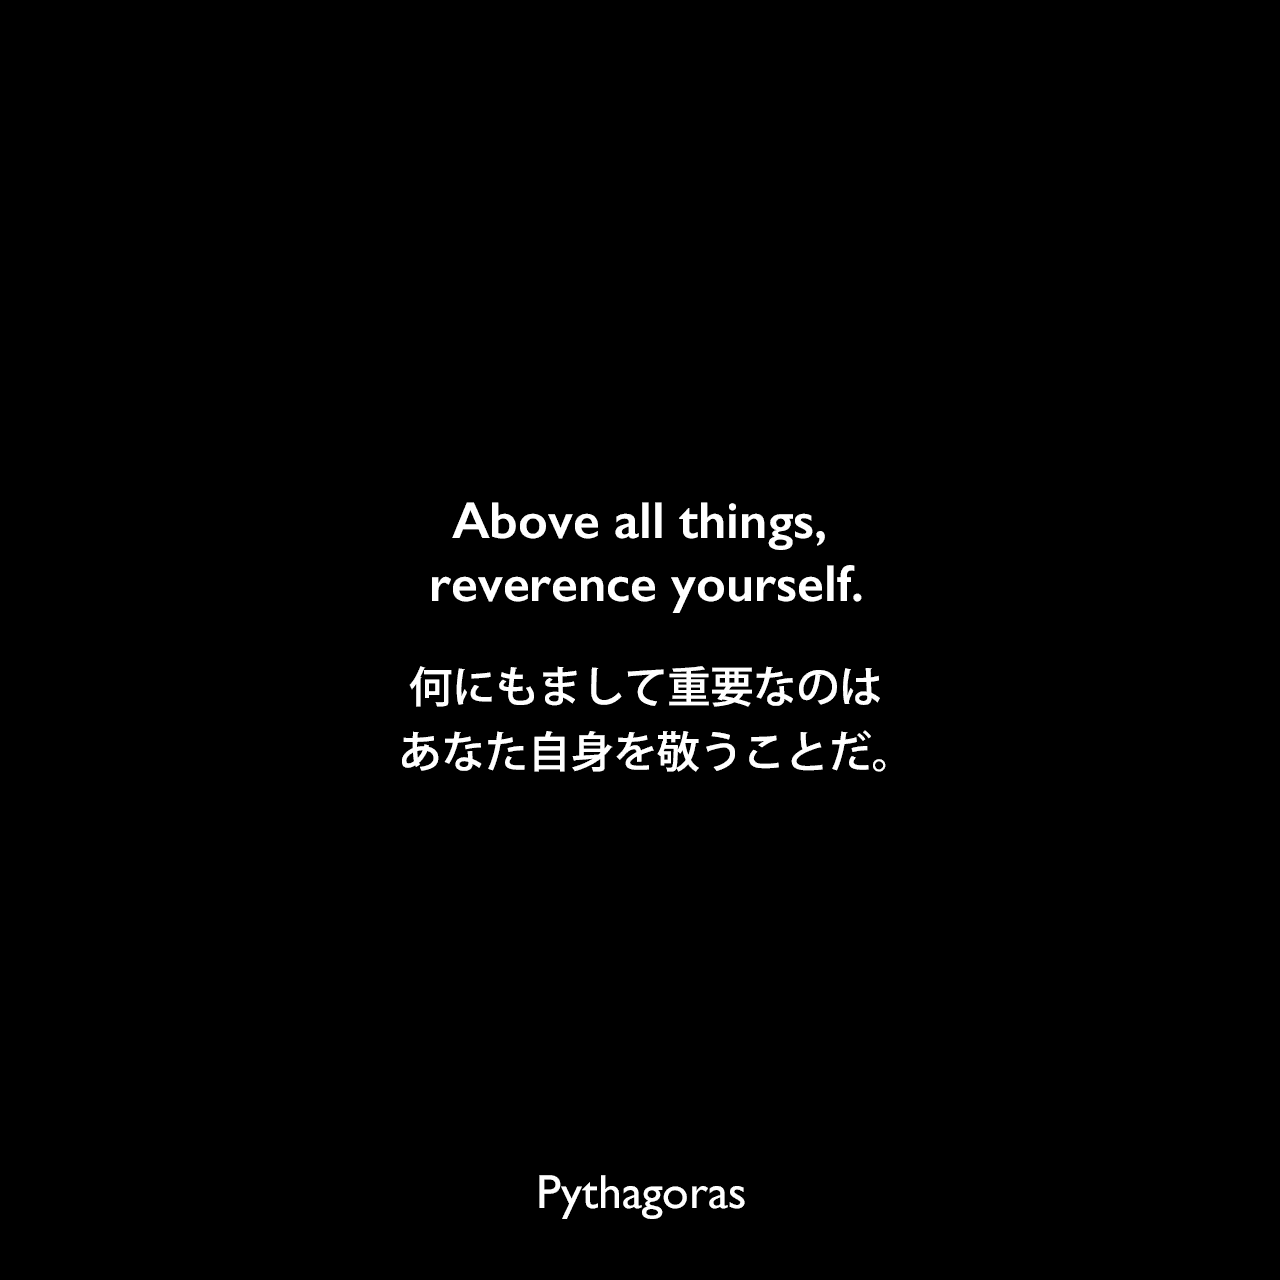 Above all things, reverence yourself.何にもまして重要なのは、あなた自身を敬うことだ。Pythagoras